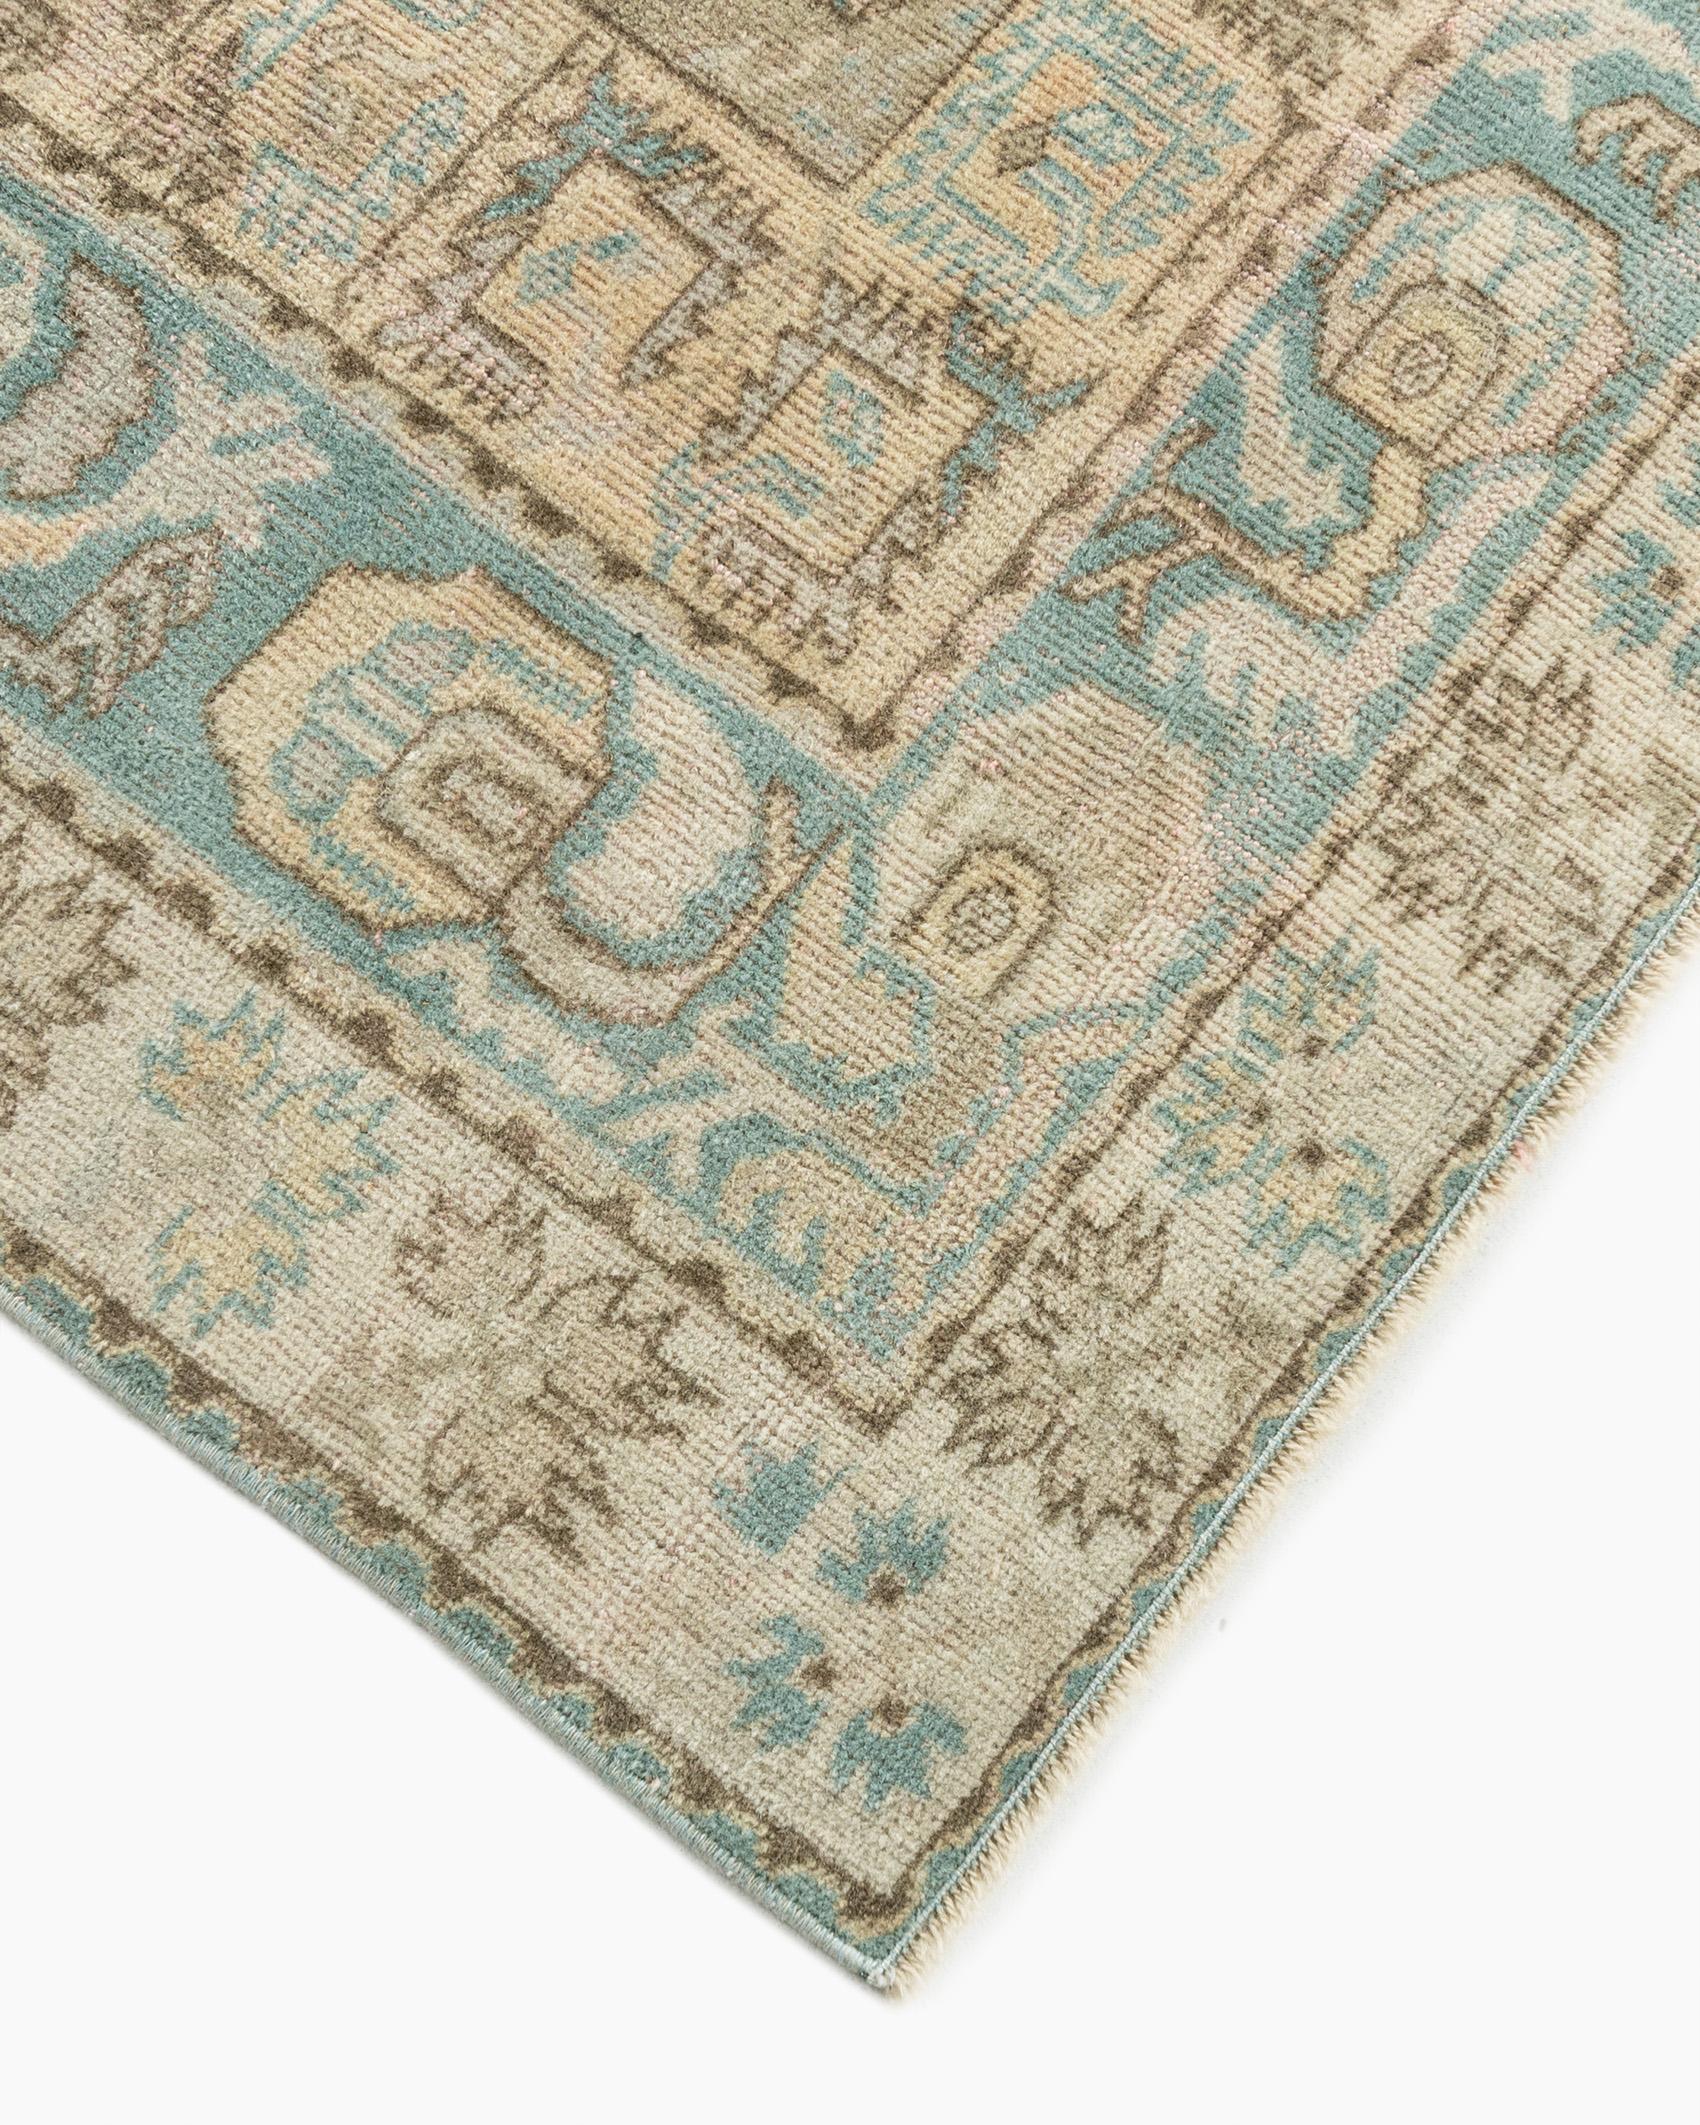 Hand-Woven Vintage Turkish Oushak Rug Lightly Distressed  6'4 x 8' For Sale